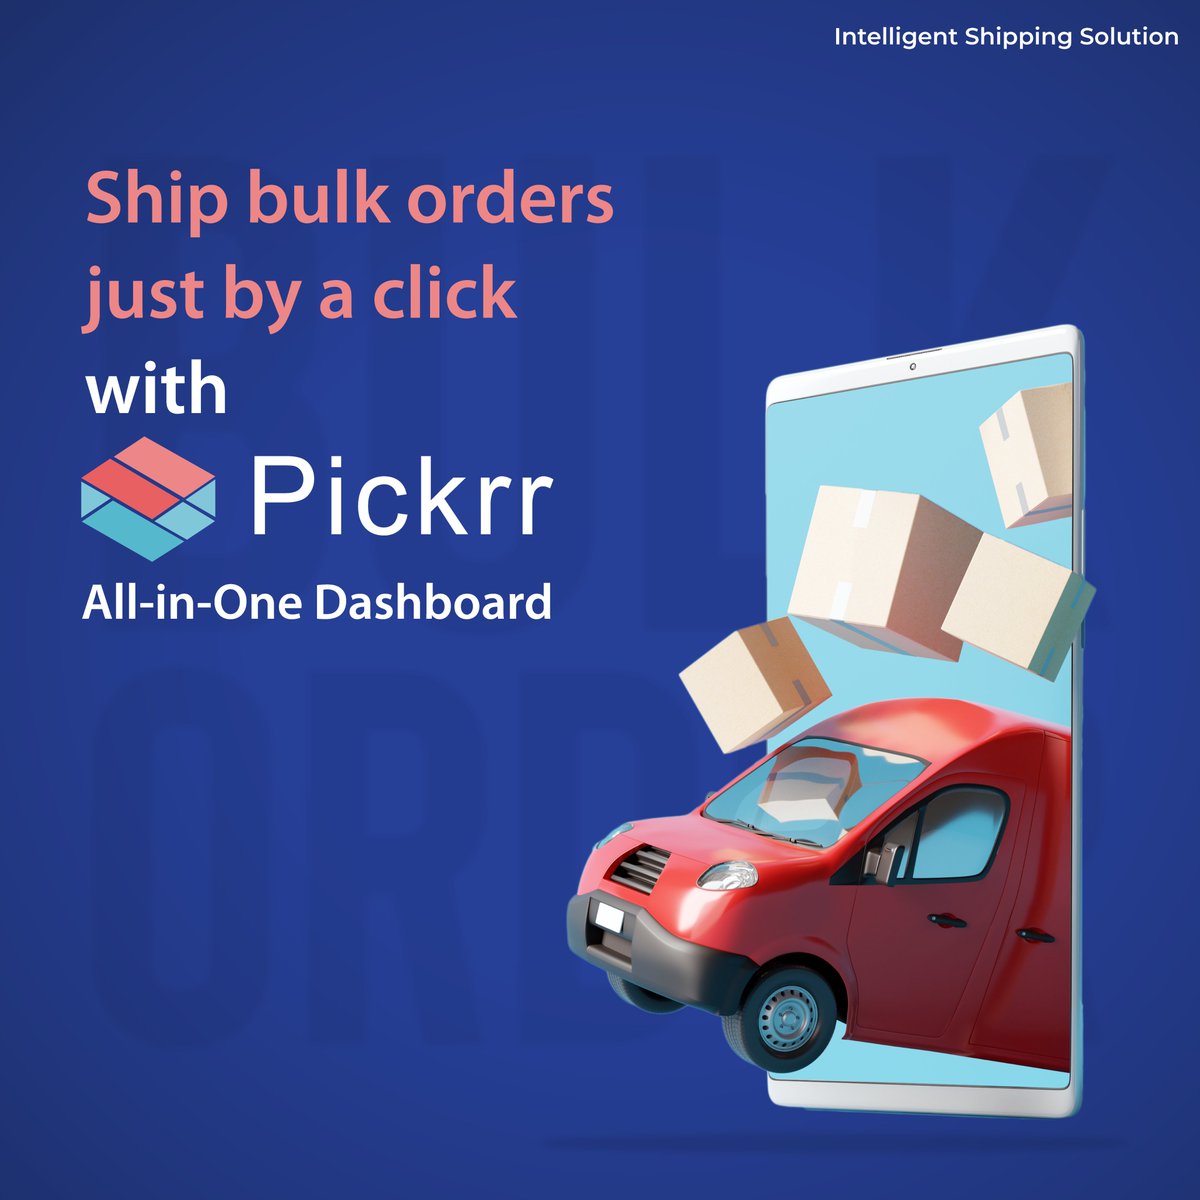 We are here to make your business and life simpler for you. Ship your bulk orders with ease with @Pickrr_ all in one dashboard. Sign up today. Visit - bit.ly/3oKT77e #ecommerce #shipping #NOFIKRRWITHPICKRR #ecommercelogistics #logisticsmanagement #ecommercesolutions